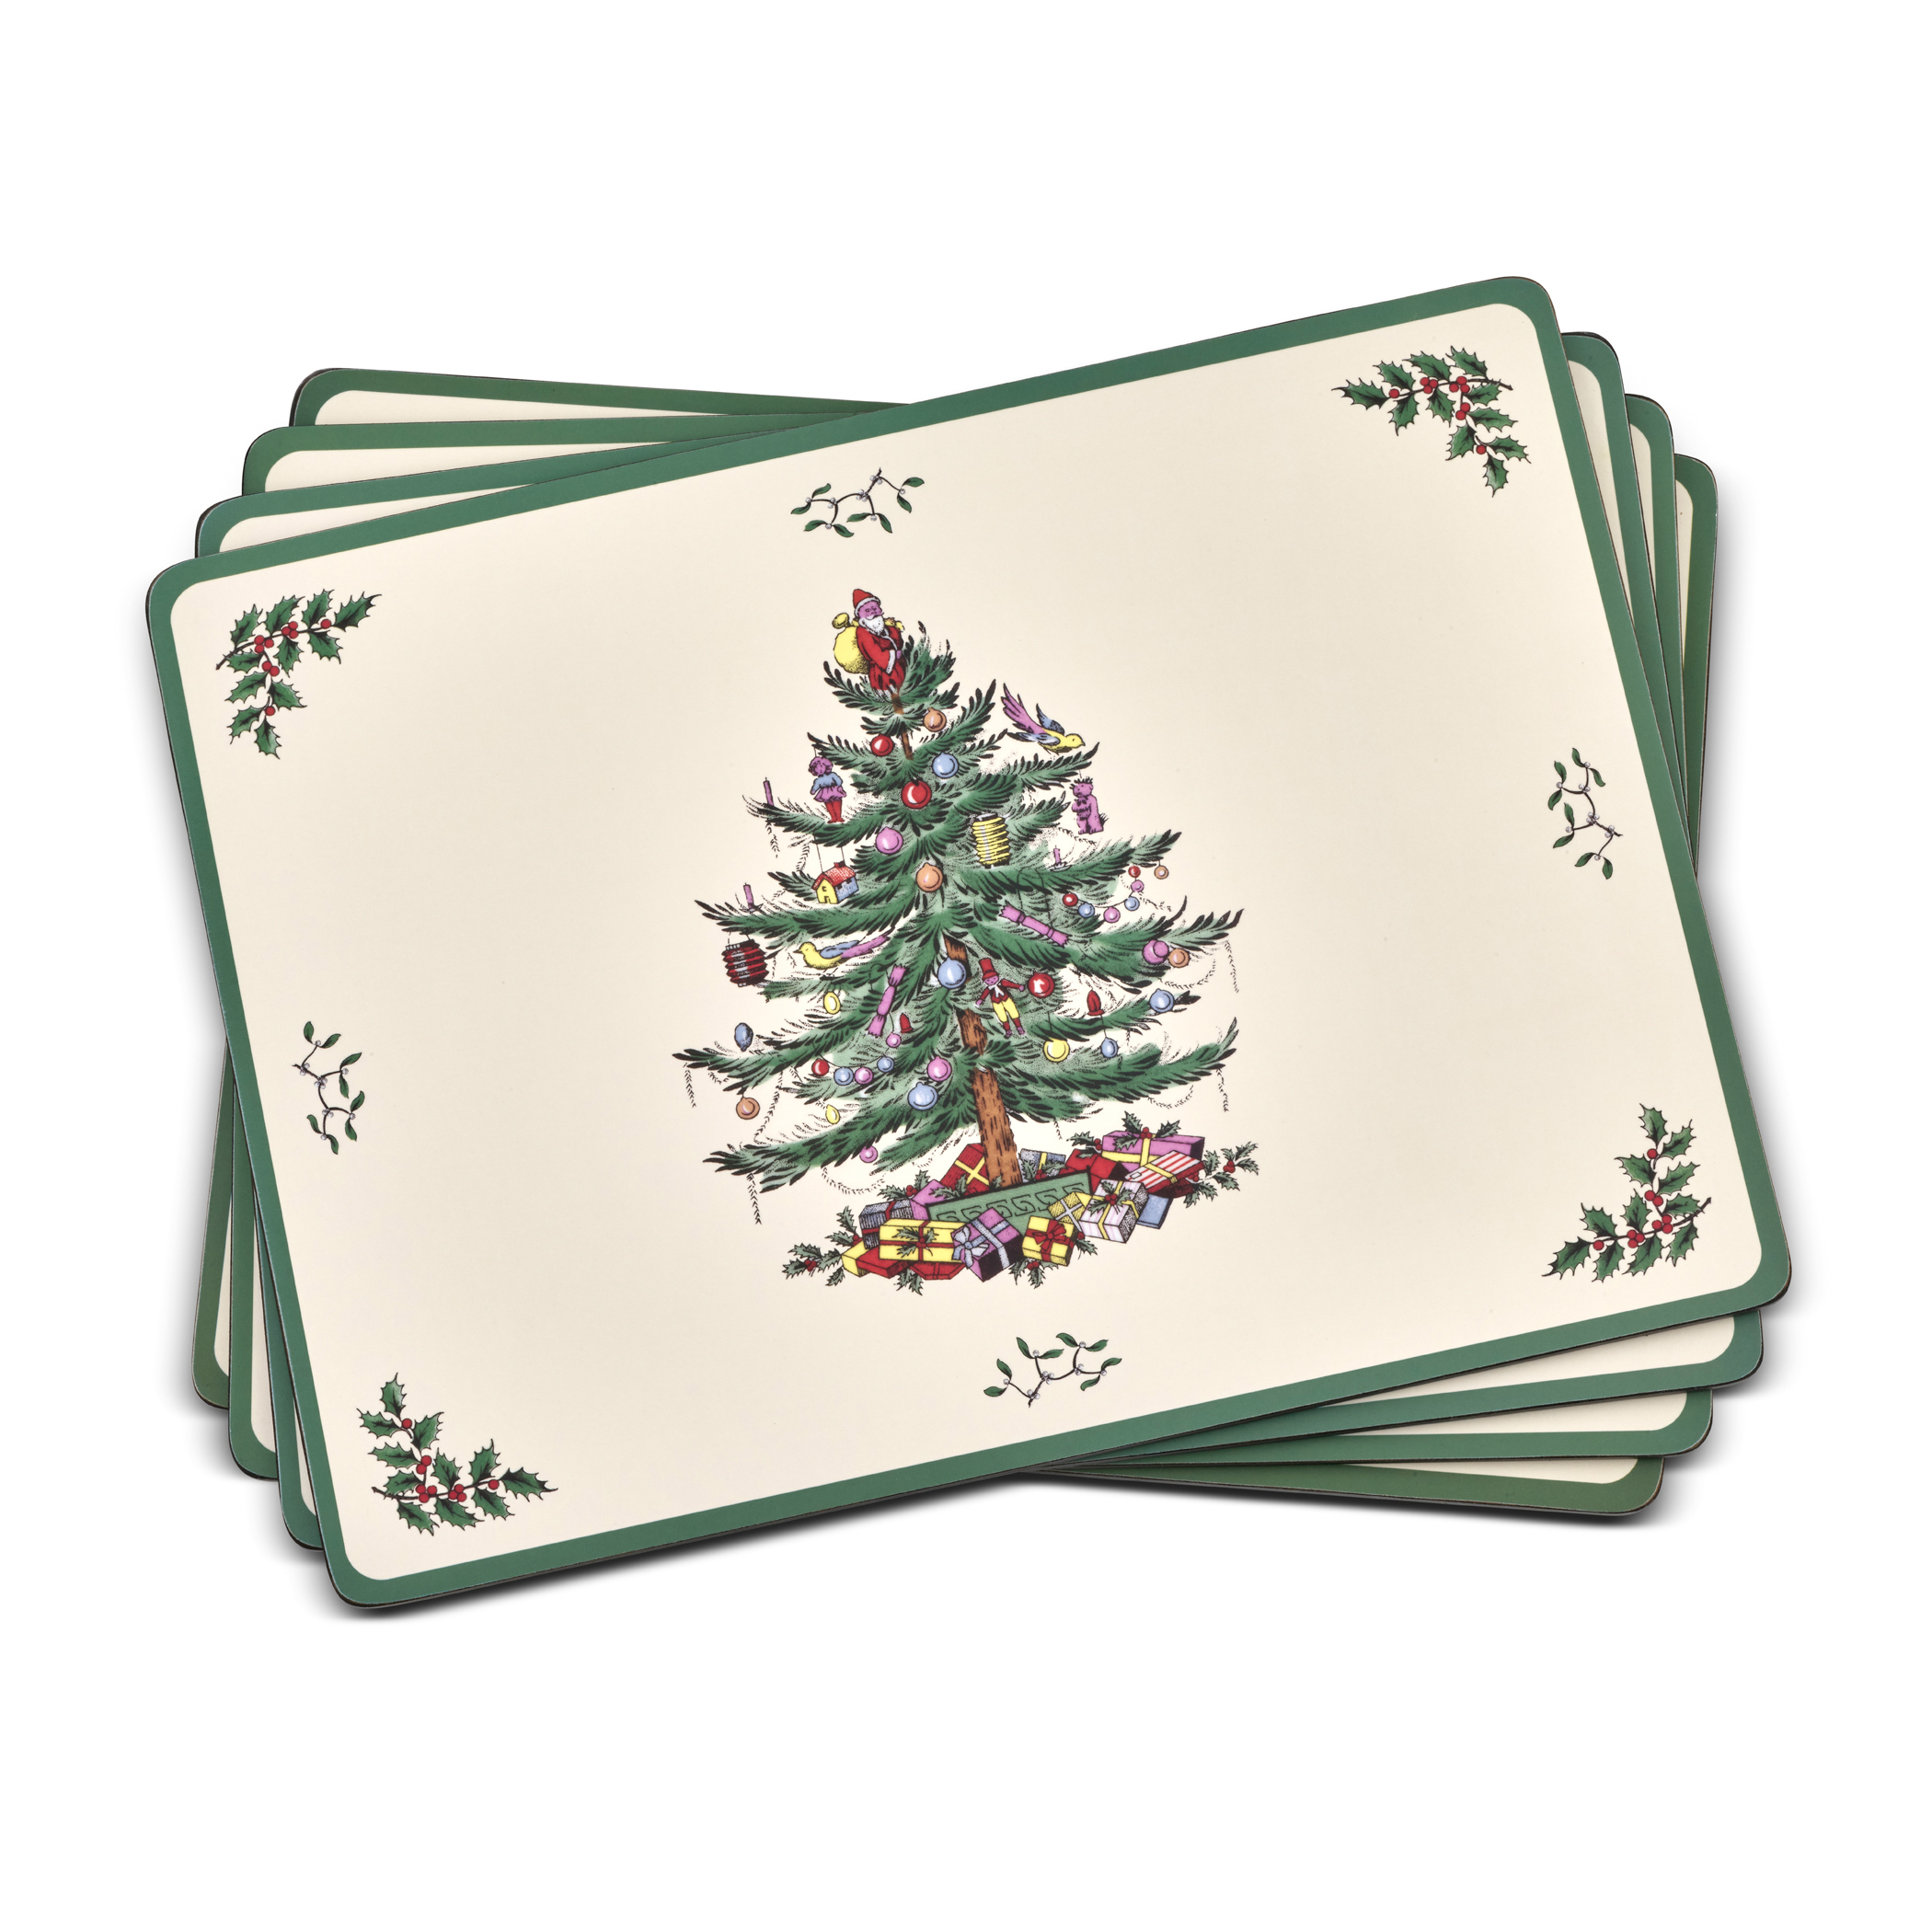 SPODE CHRISTMAS TREE CREAM WHITE GREEN HARD BACKED 12" X 9" PLACEMATS LOT OF 4 